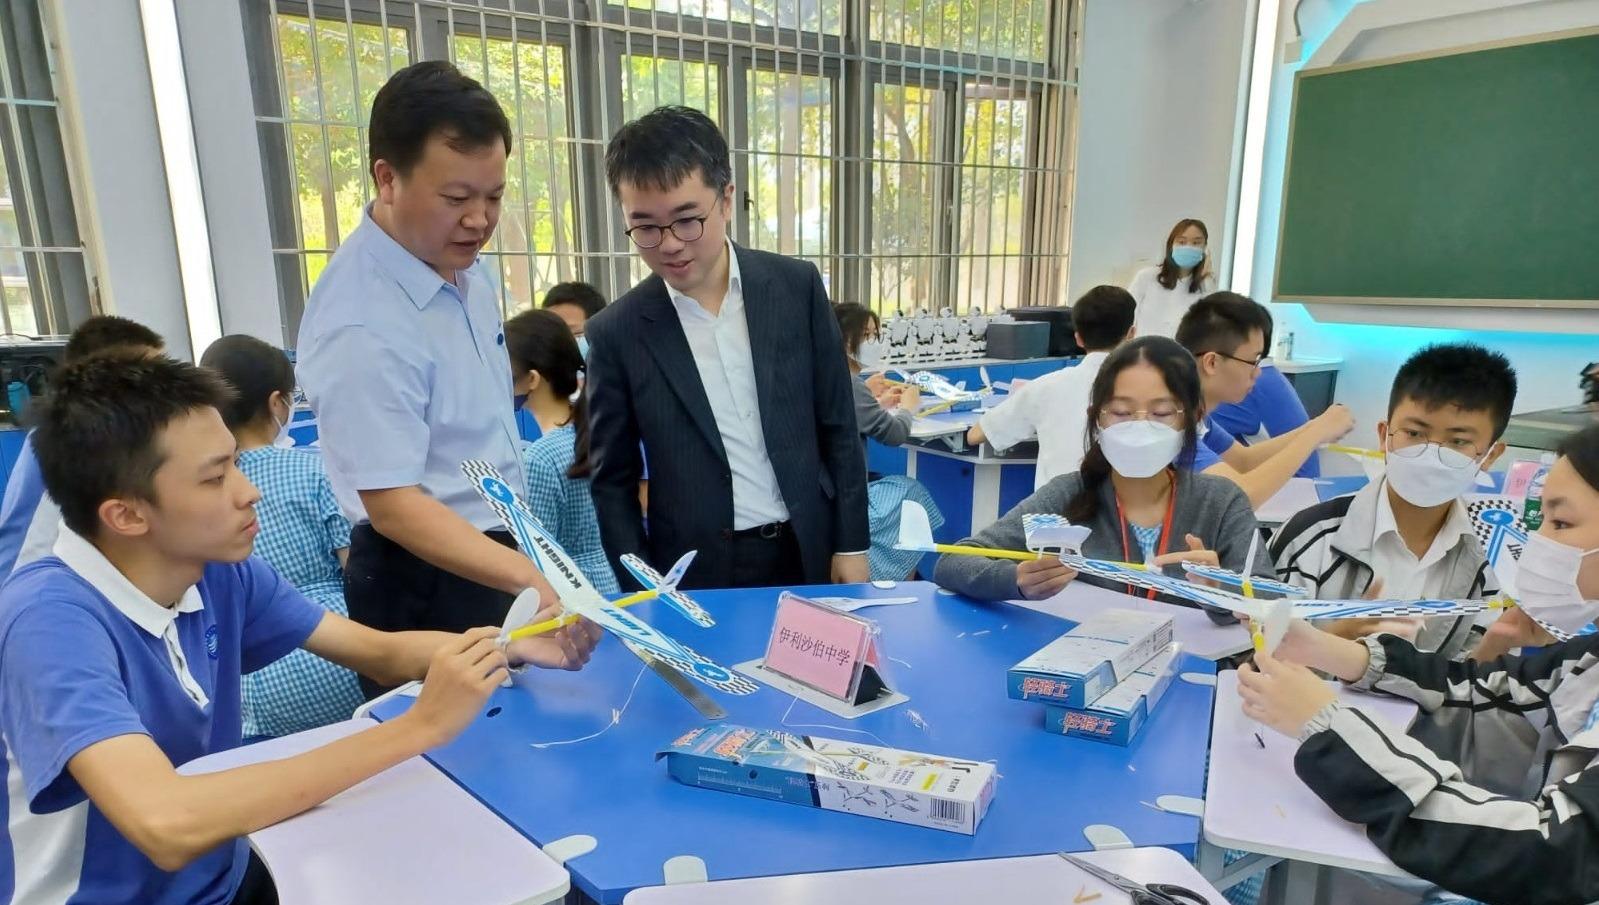 The Under Secretary for Education, Mr Sze Chun-fai, visited Shenzhen Second Foreign Languages School (SSFLS) today (May 18) to participate in a sister school exchange activity for Queen Elizabeth School and SSFLS. Photo shows Mr Sze (third left) observing the making of airplane gliders by students of both schools.